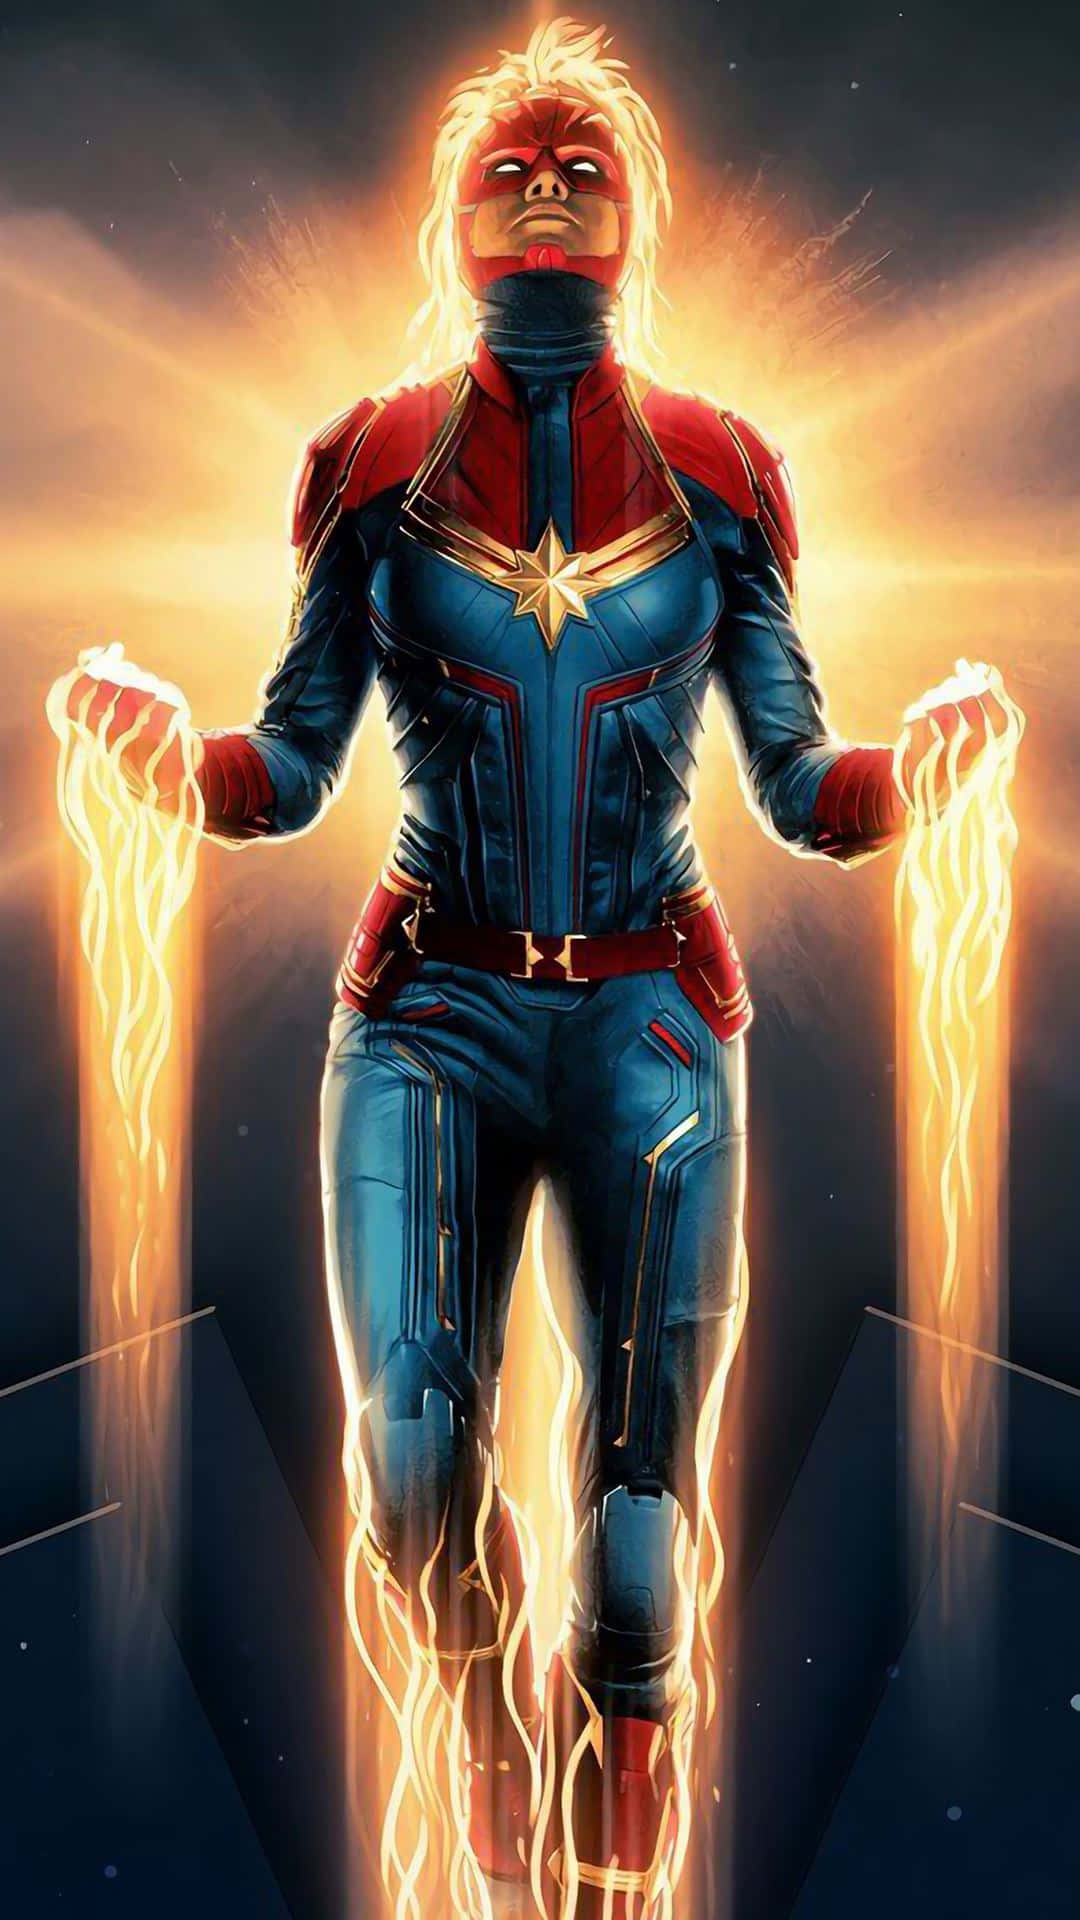 "Your world is yours with the Captain Marvel Ipad" Wallpaper